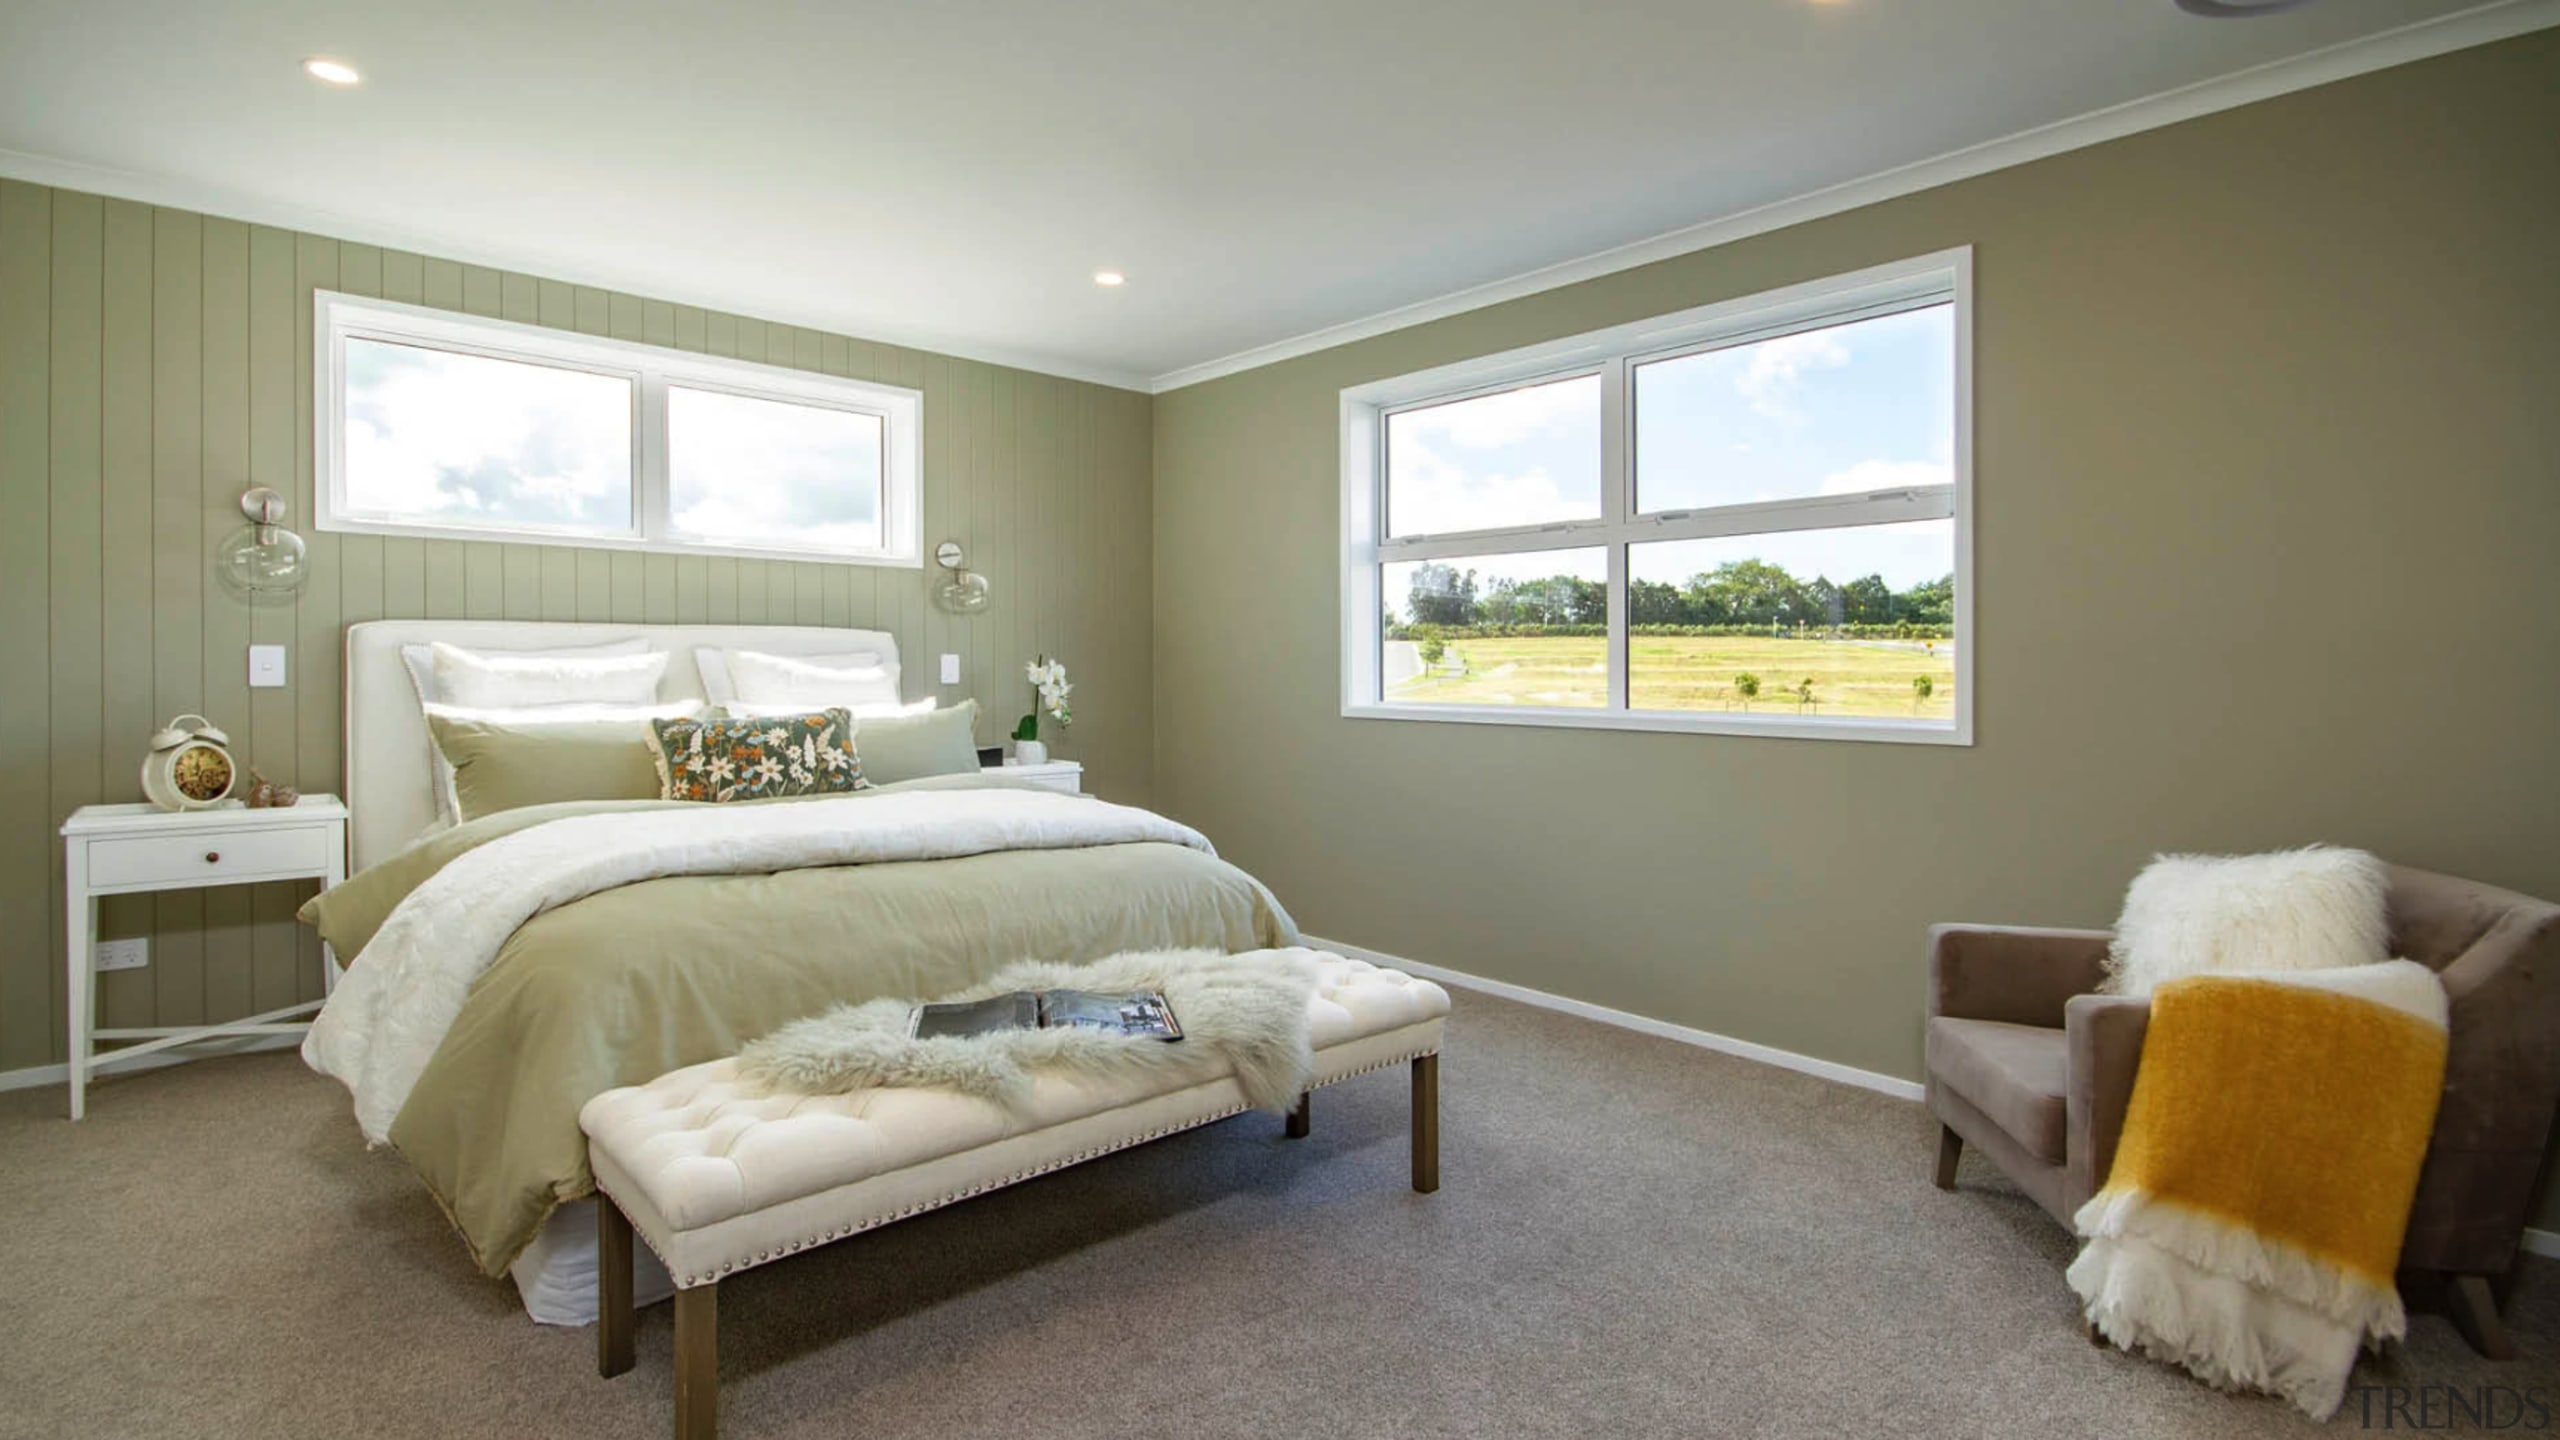 The generous and private upstairs master bedroom is 